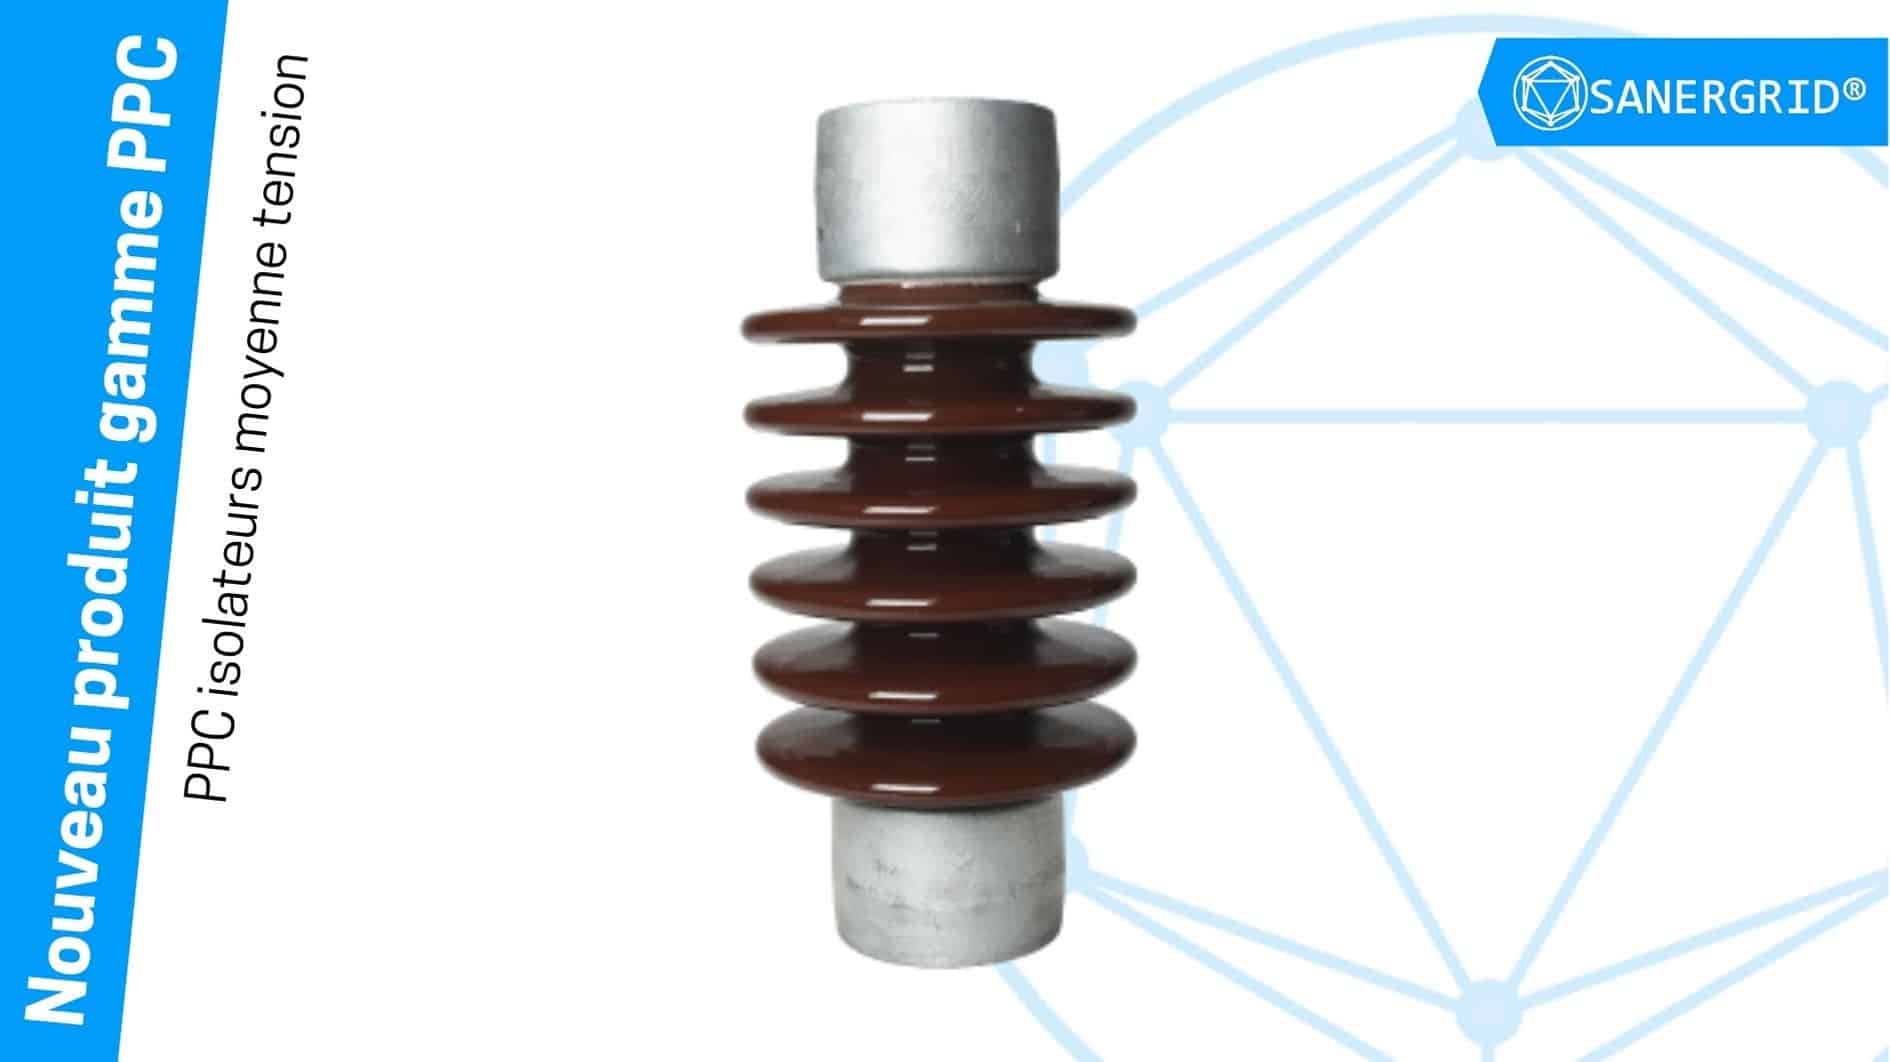 PPC Insulators wide range of electrical insulation products and services for applications up to 1200 kV AC (Alternating Current) and 1100 kV DC (Direct Current).